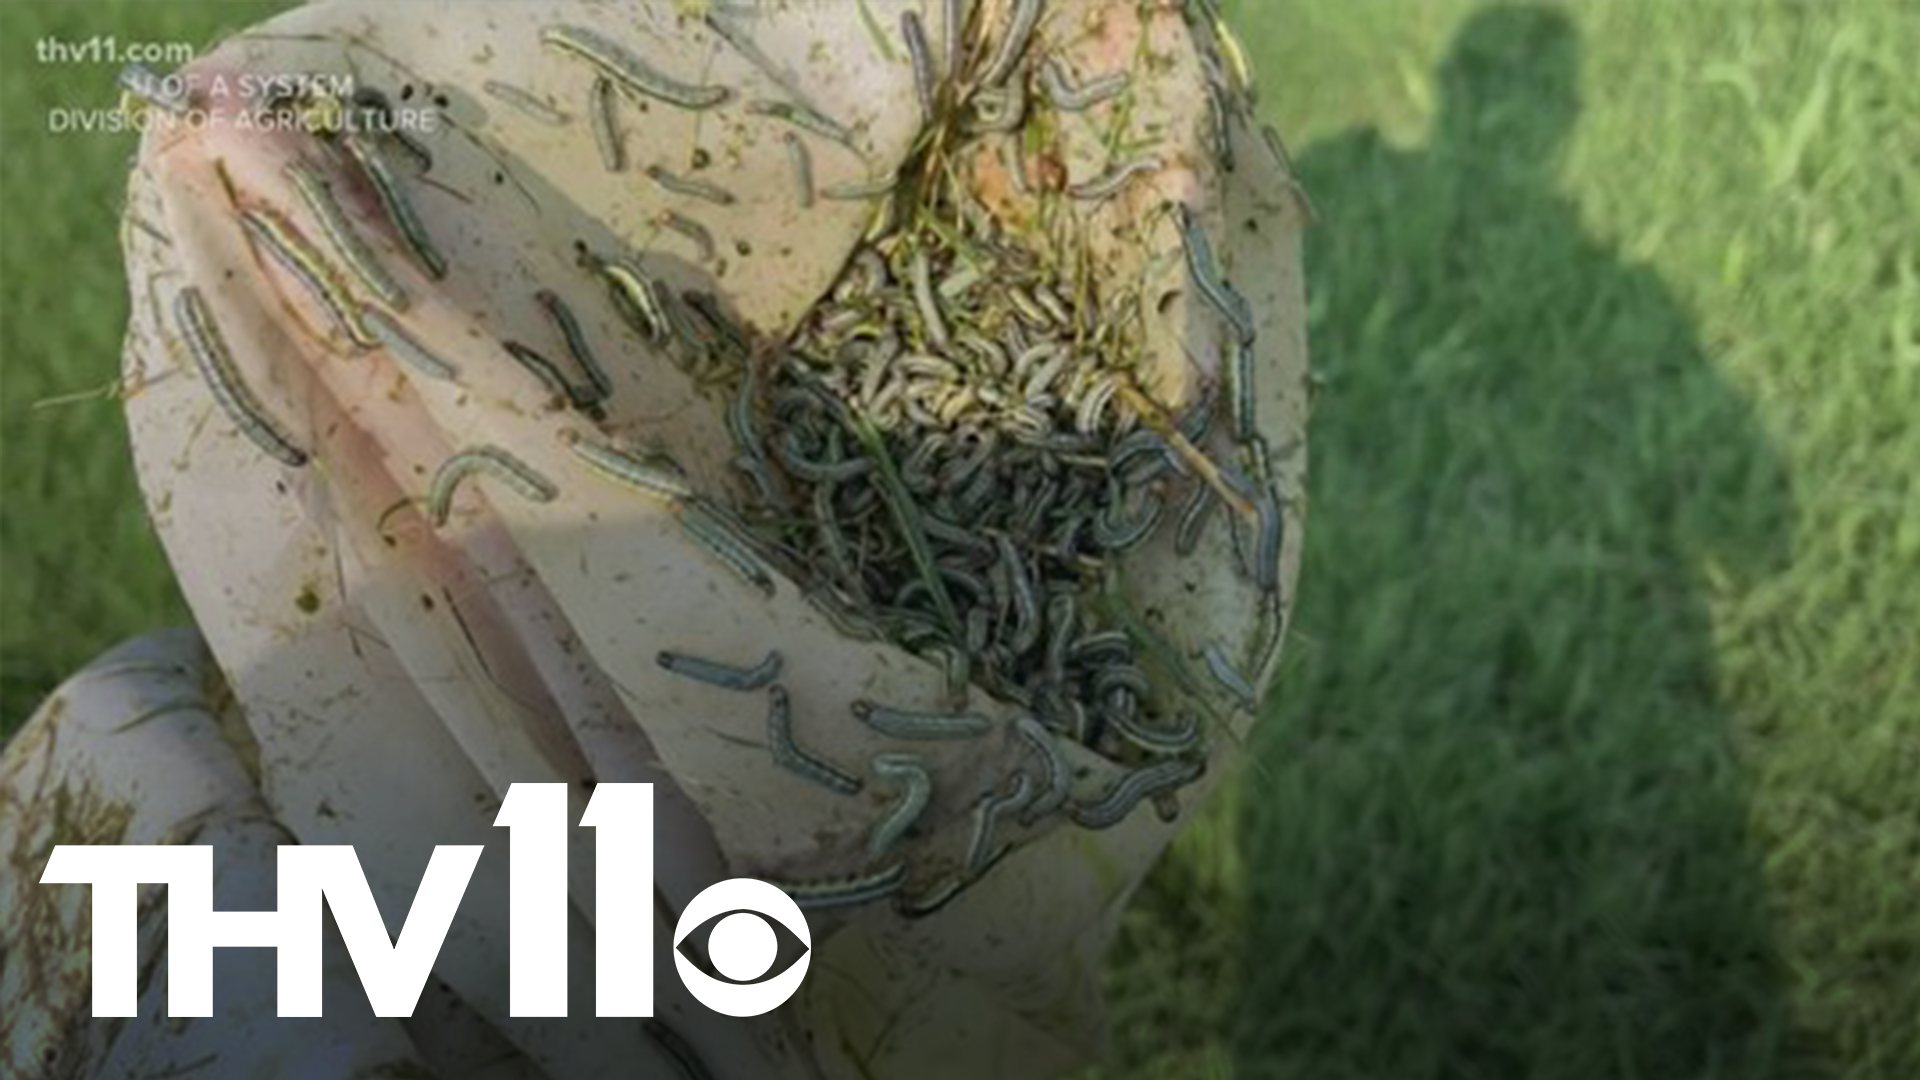 There are thousands of little pests marching through yards and fields across Arkansas. Army worms can destroy grass and crops.